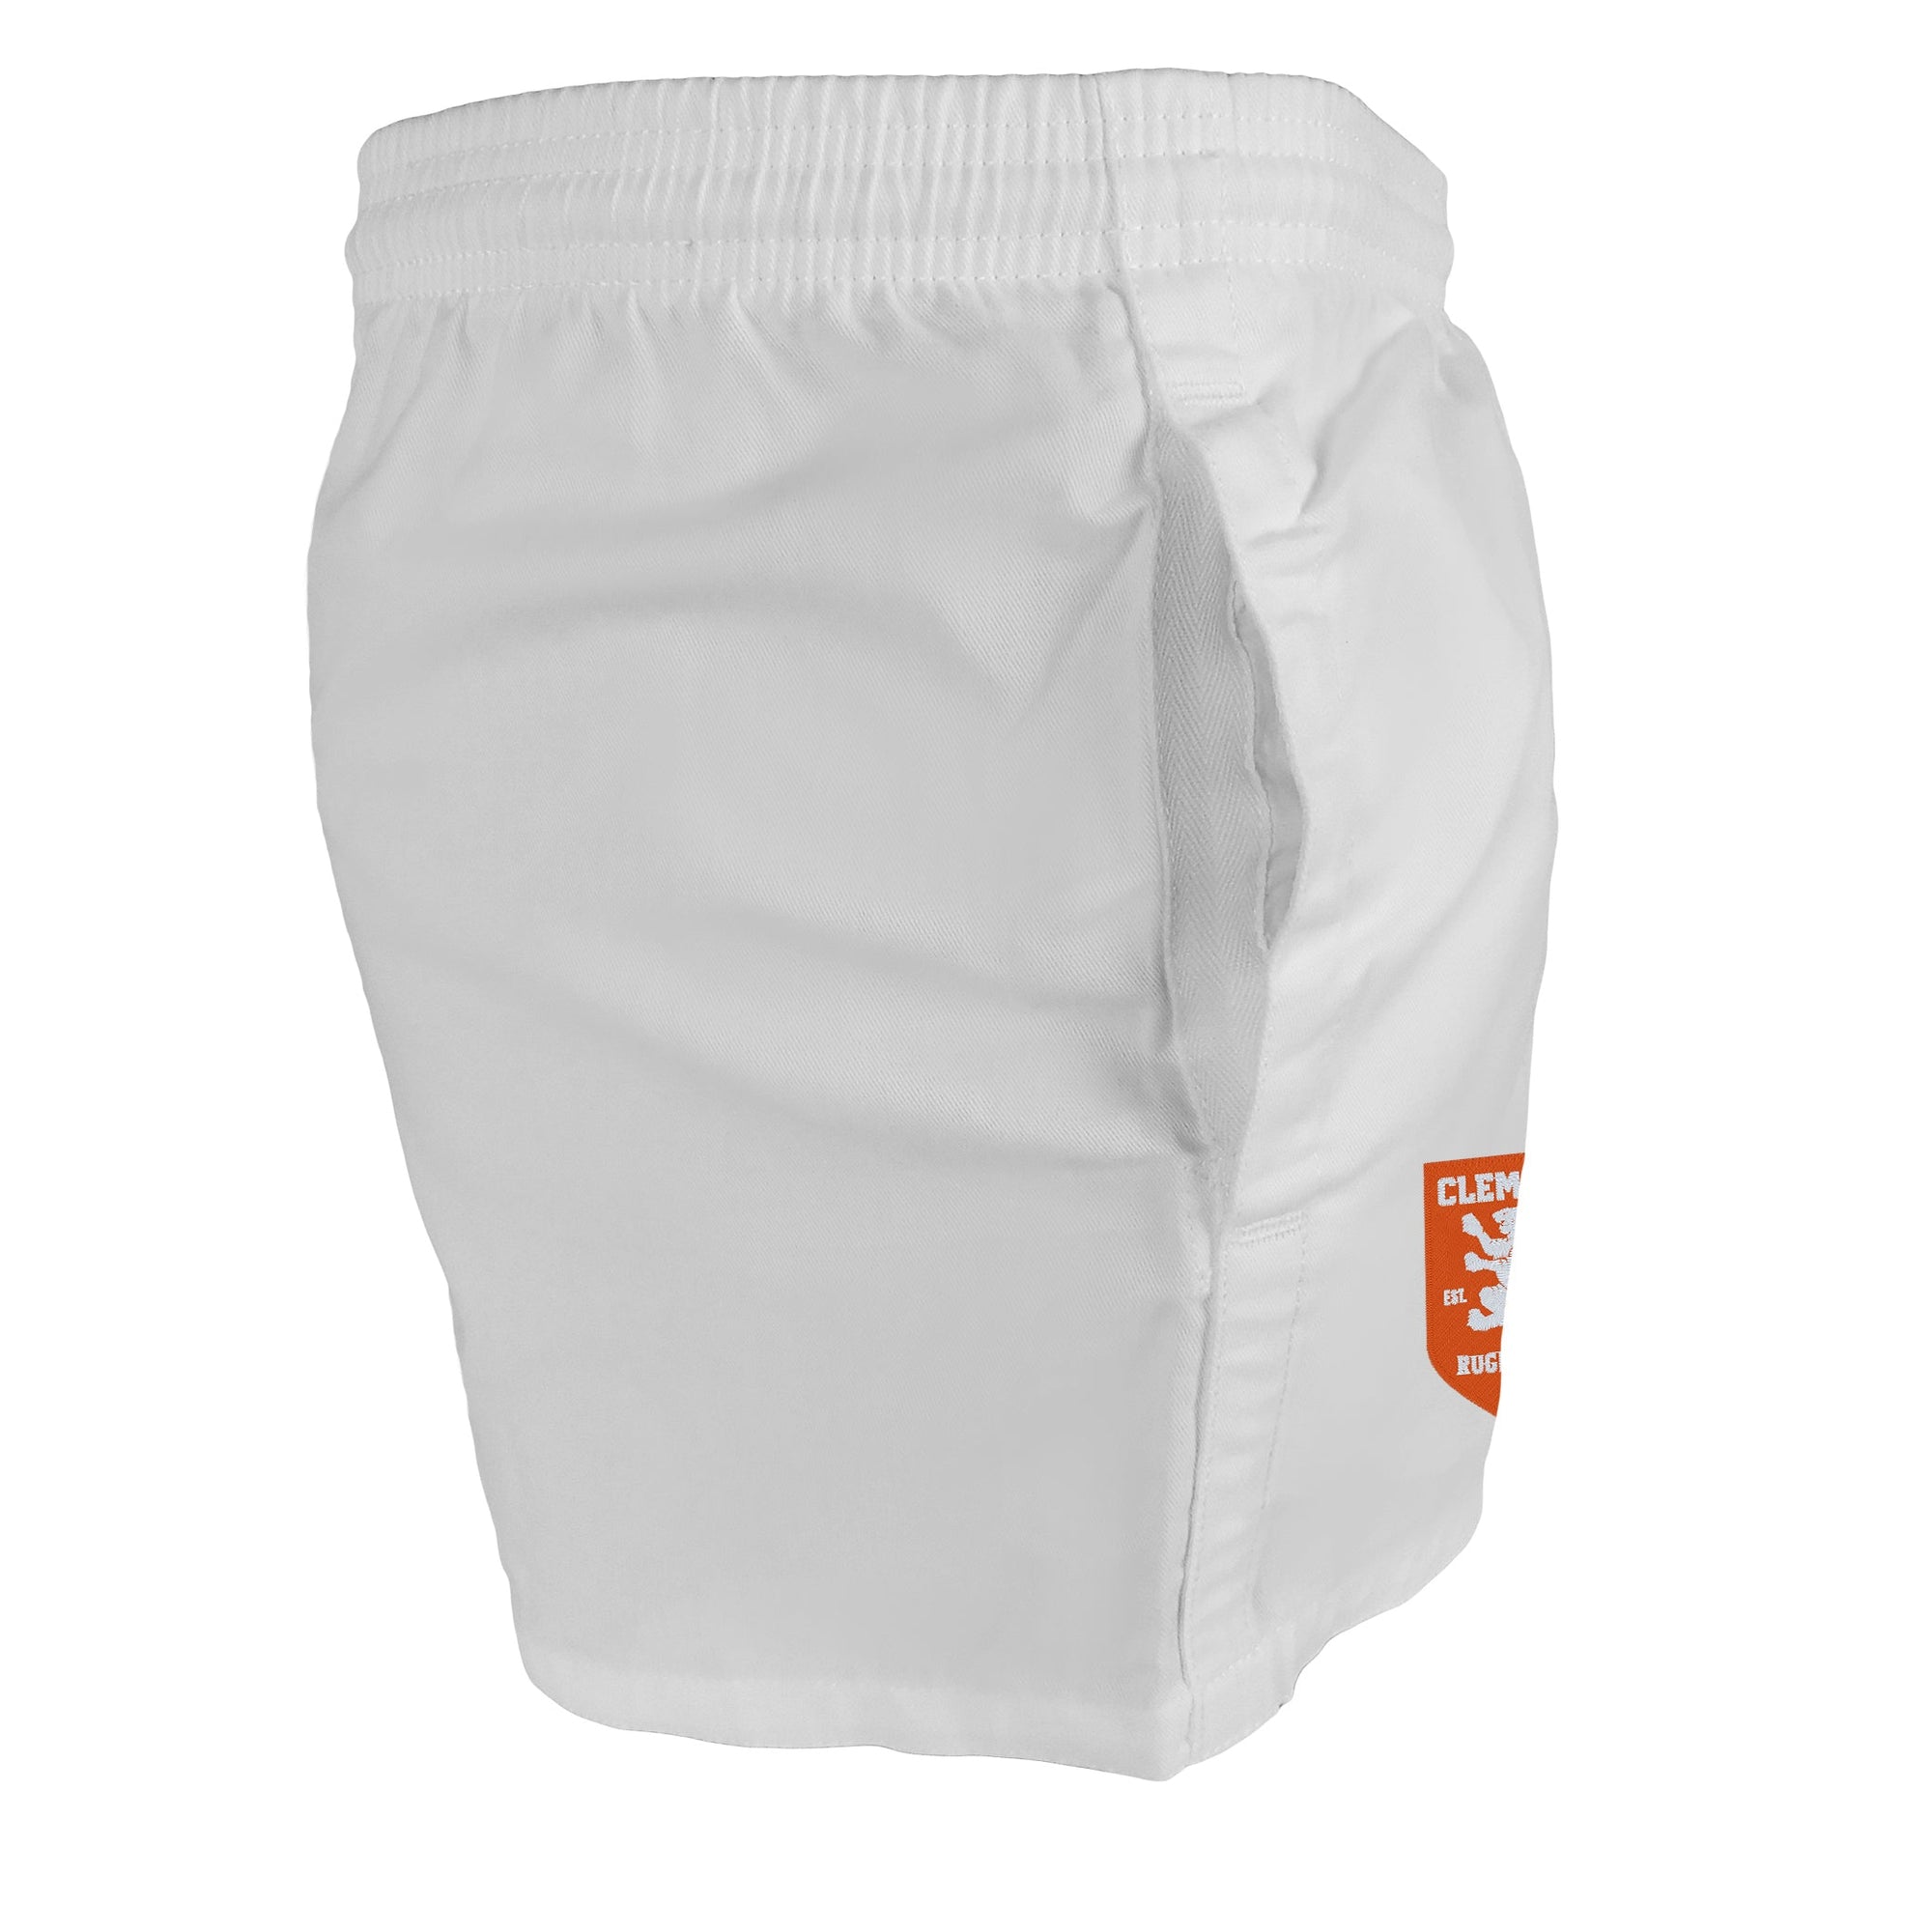 Rugby Imports Clemson Rugby Kiwi Pro Rugby Shorts